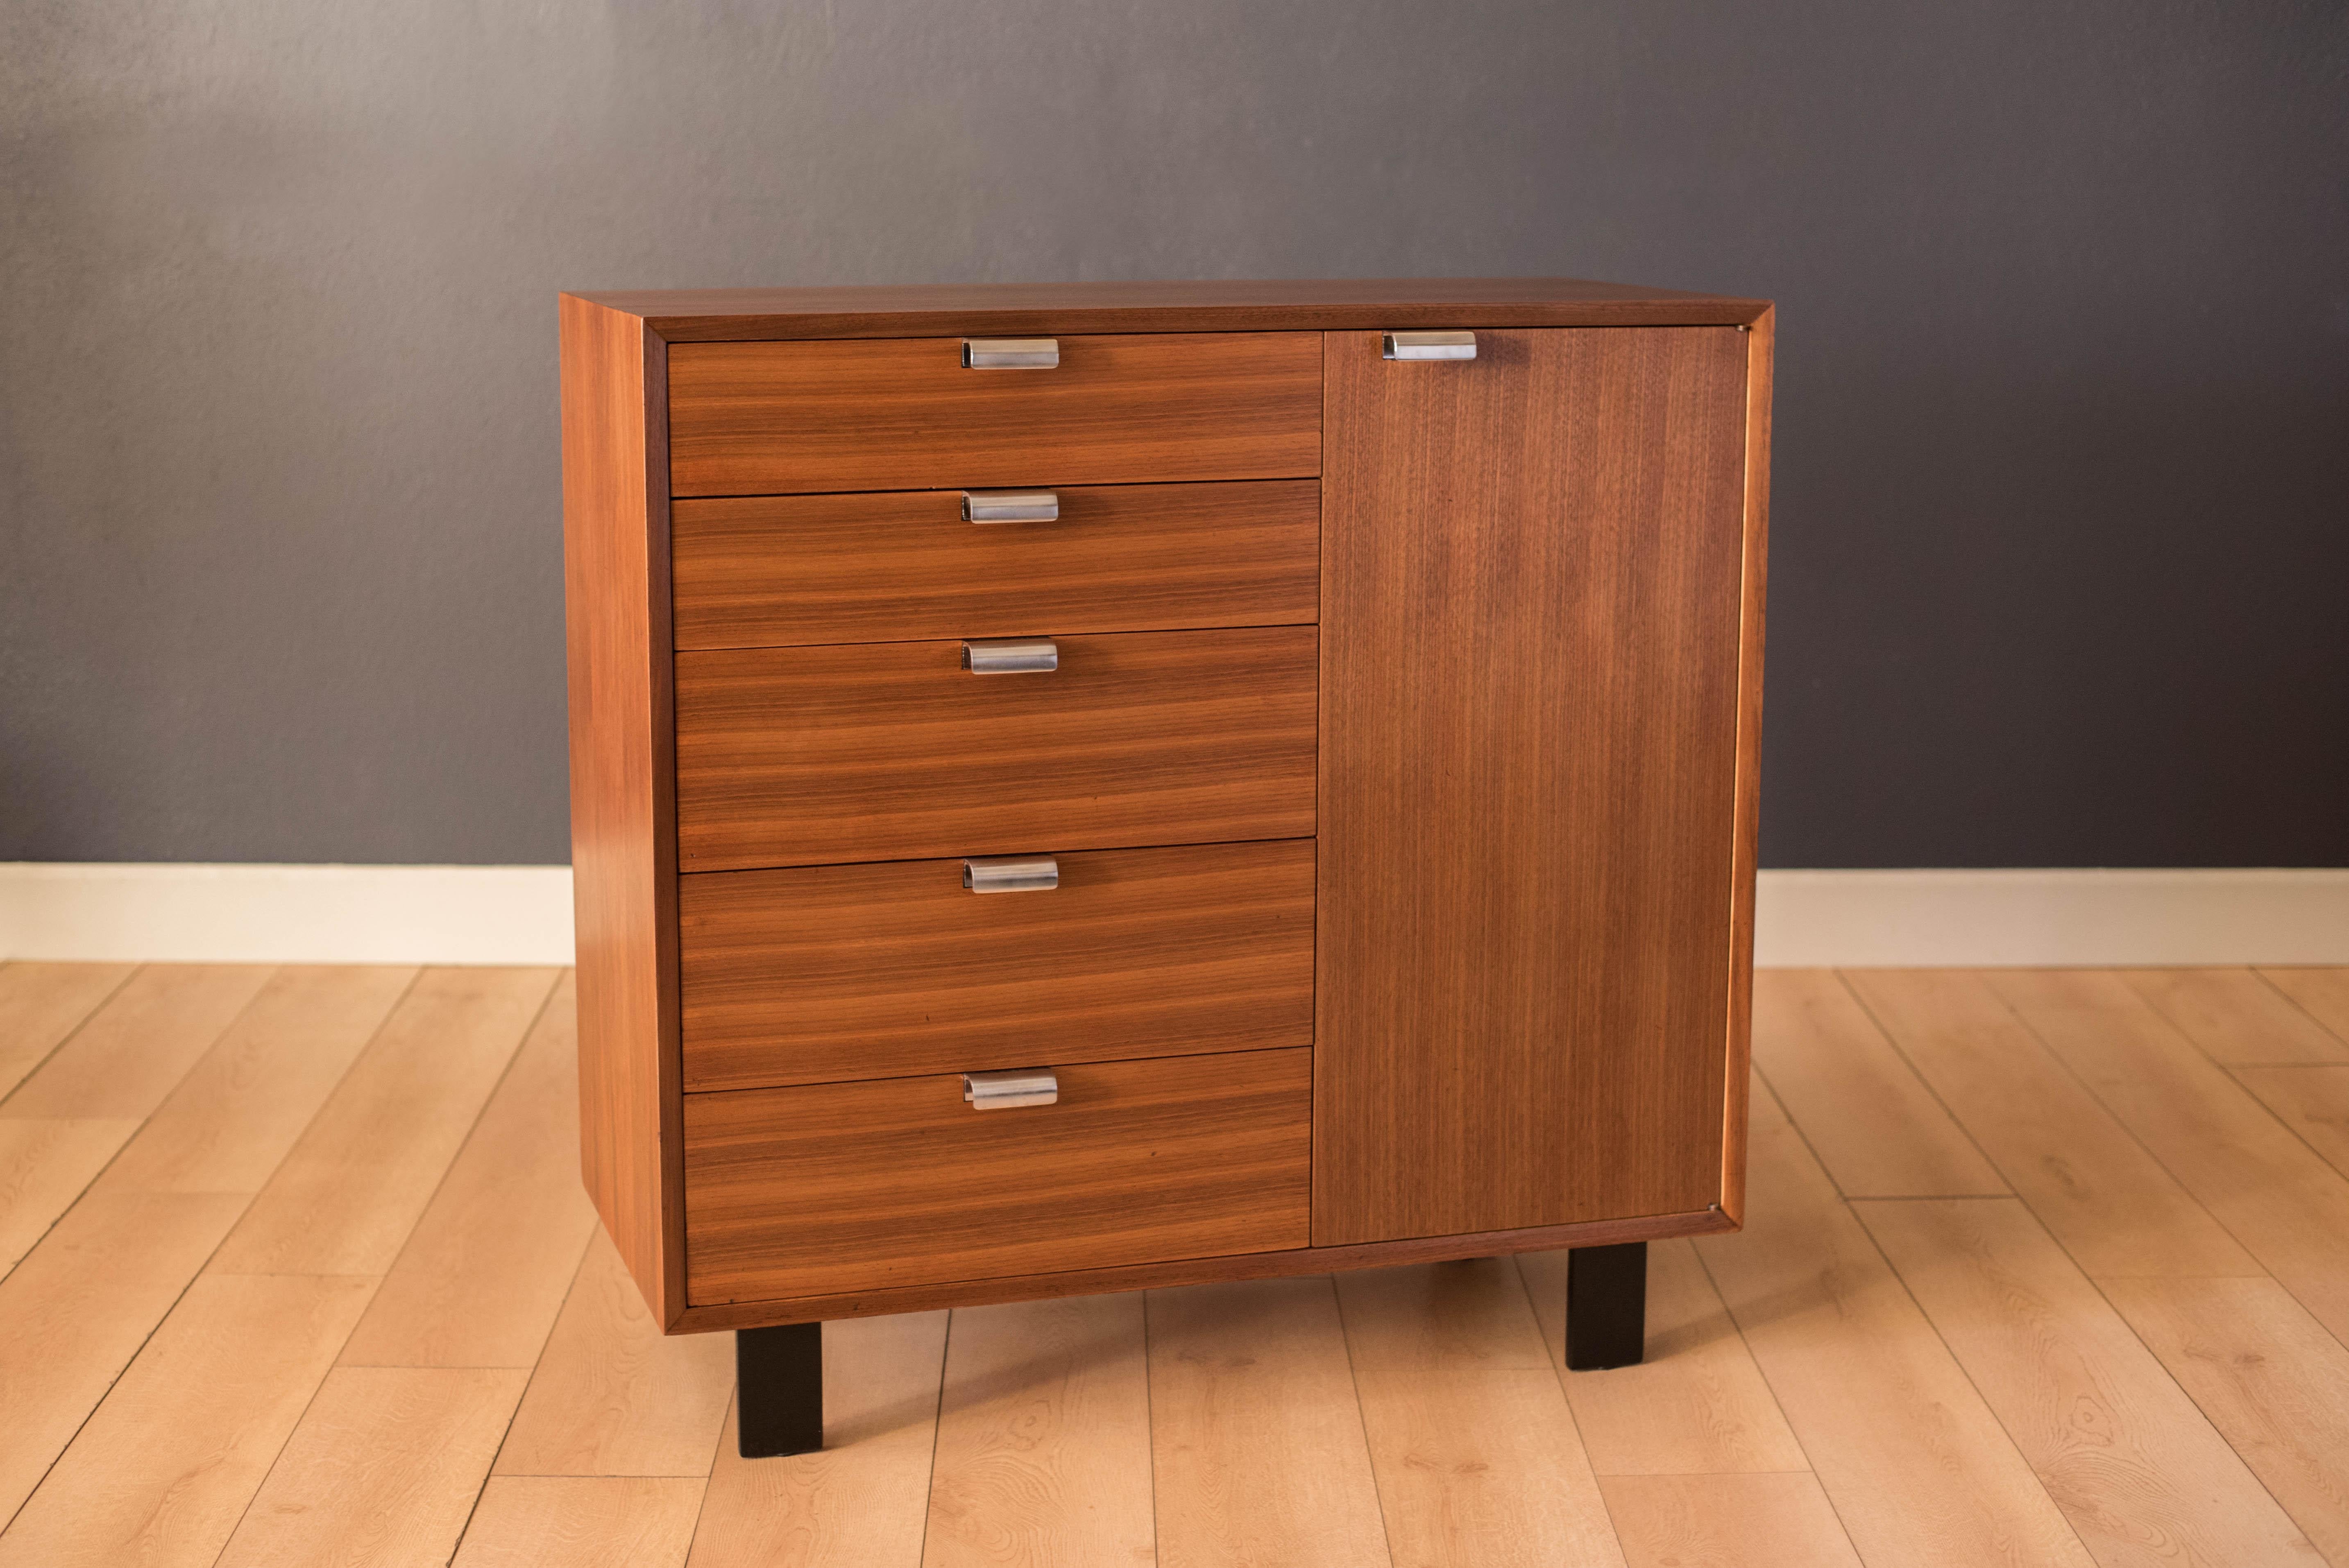 Mid-Century Modern BCS dresser chest model no. 4621 designed by George Nelson for Herman Miller in walnut circa 1950s. This piece offers plenty of storage including five dovetailed drawers and a closed cabinet with adjustable shelving. Features the